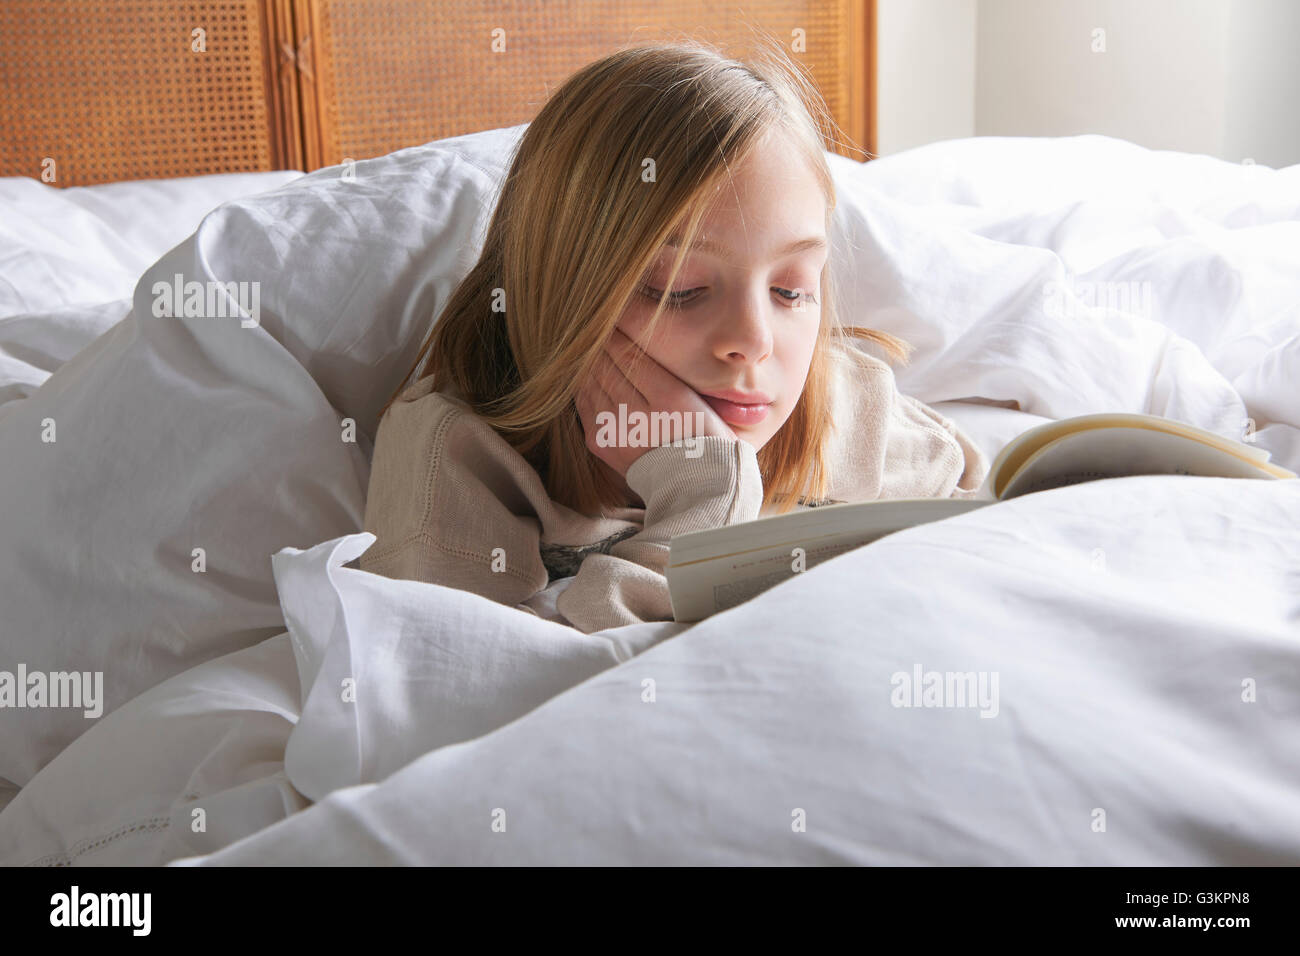 Fille aux cheveux blonds reading book in bed Banque D'Images